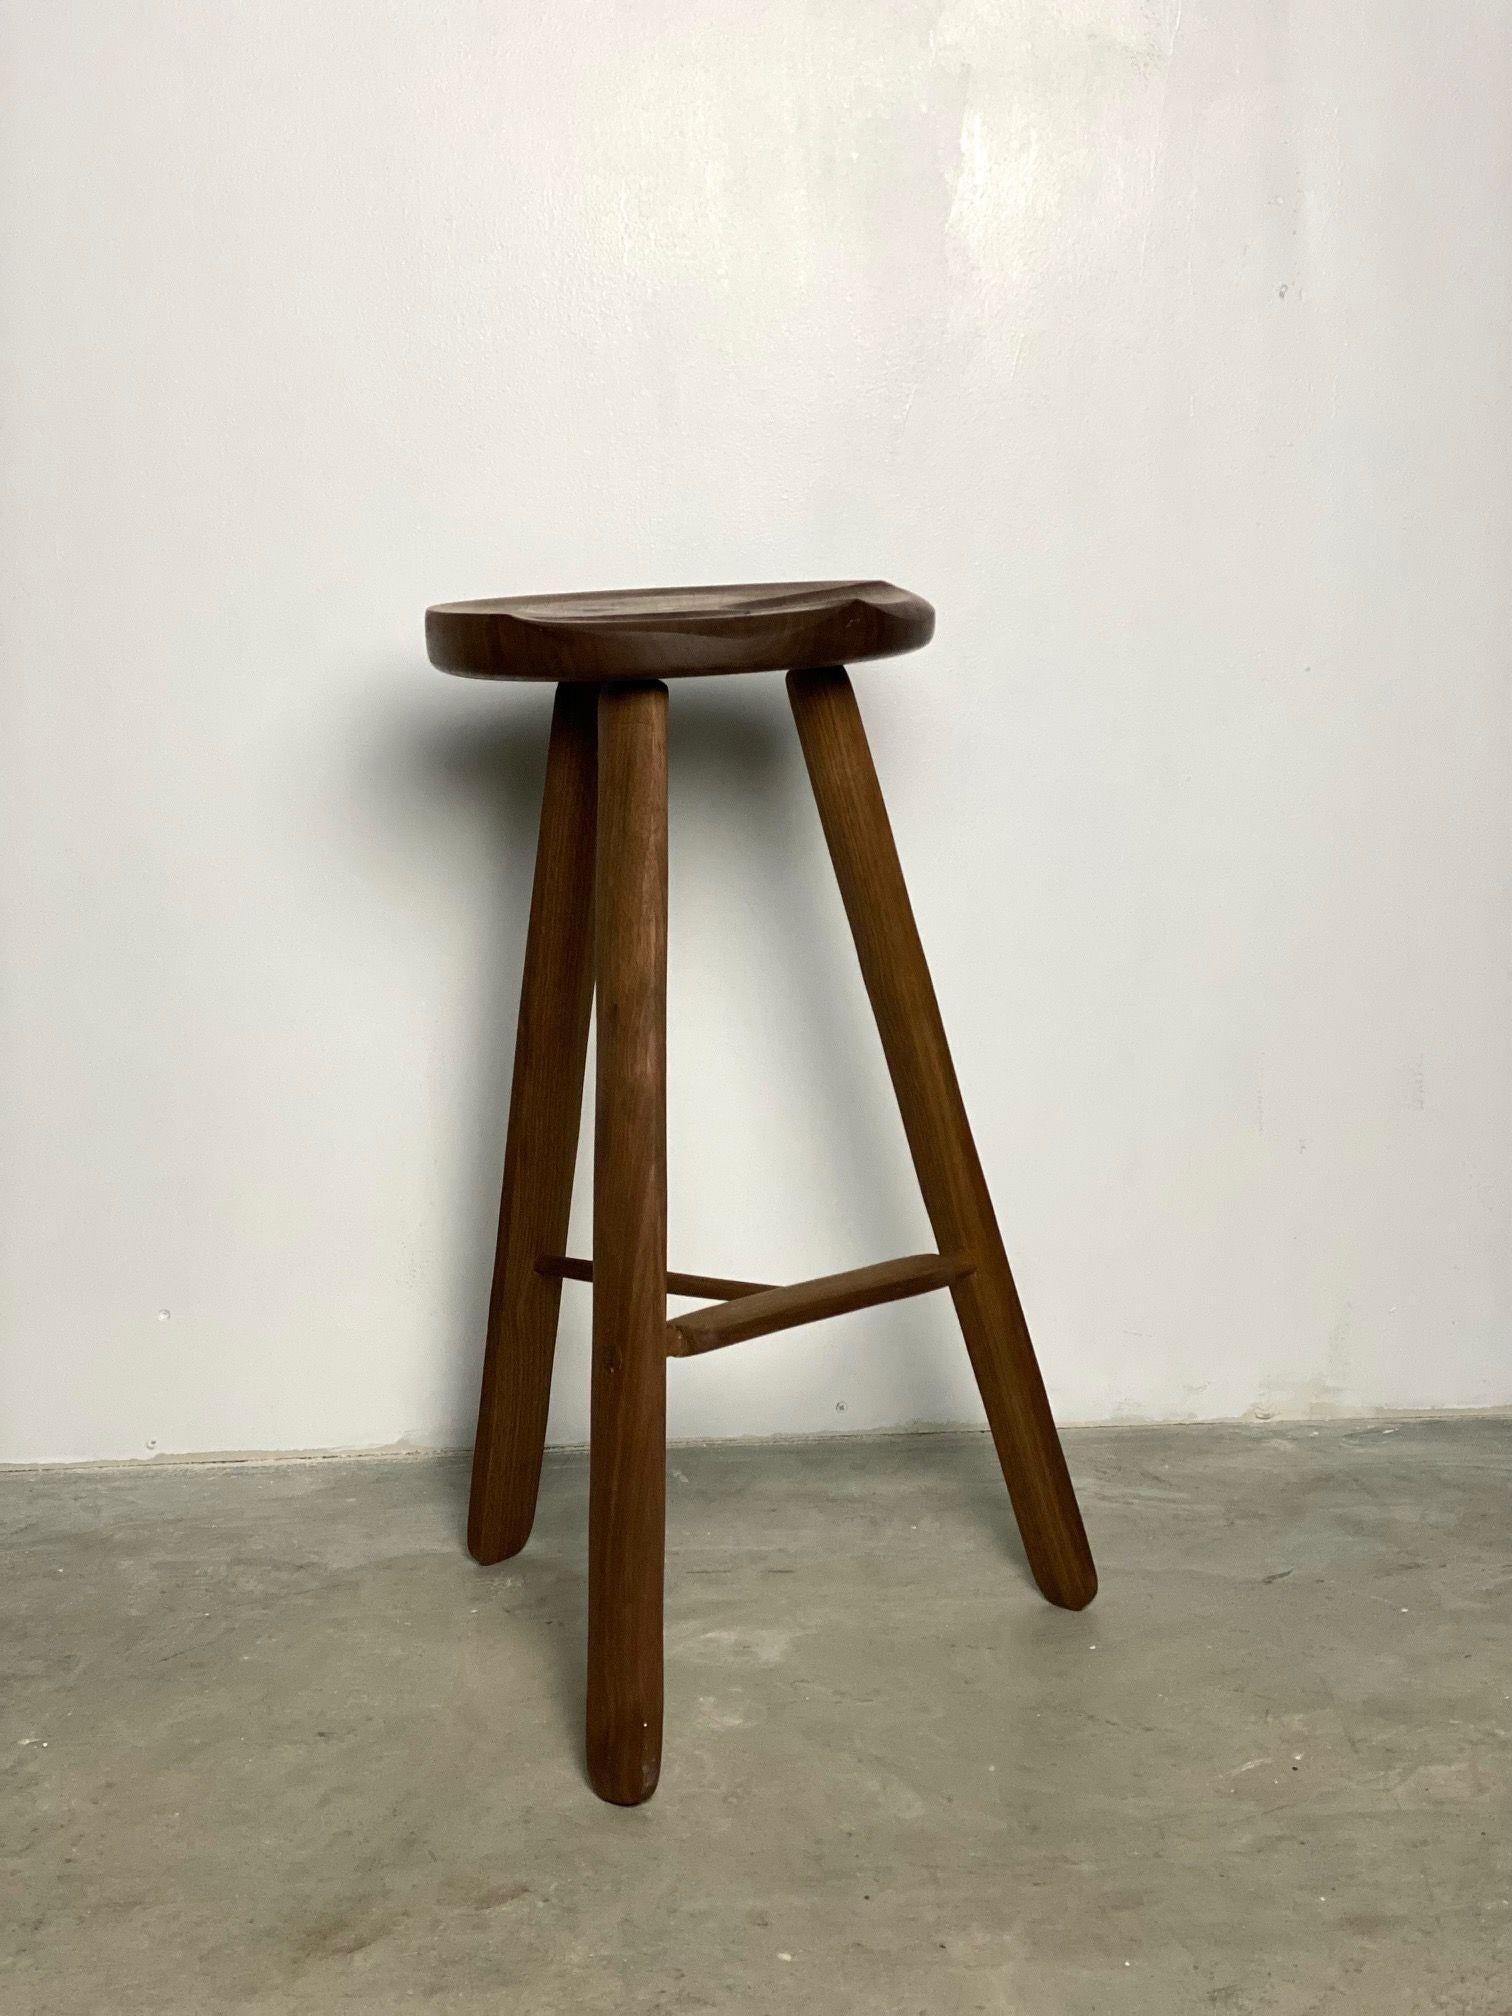 Sculpted figured walnut counter stool by Ohio Craftsman Michael Rozell.
These can be ordered also in larger quantities.